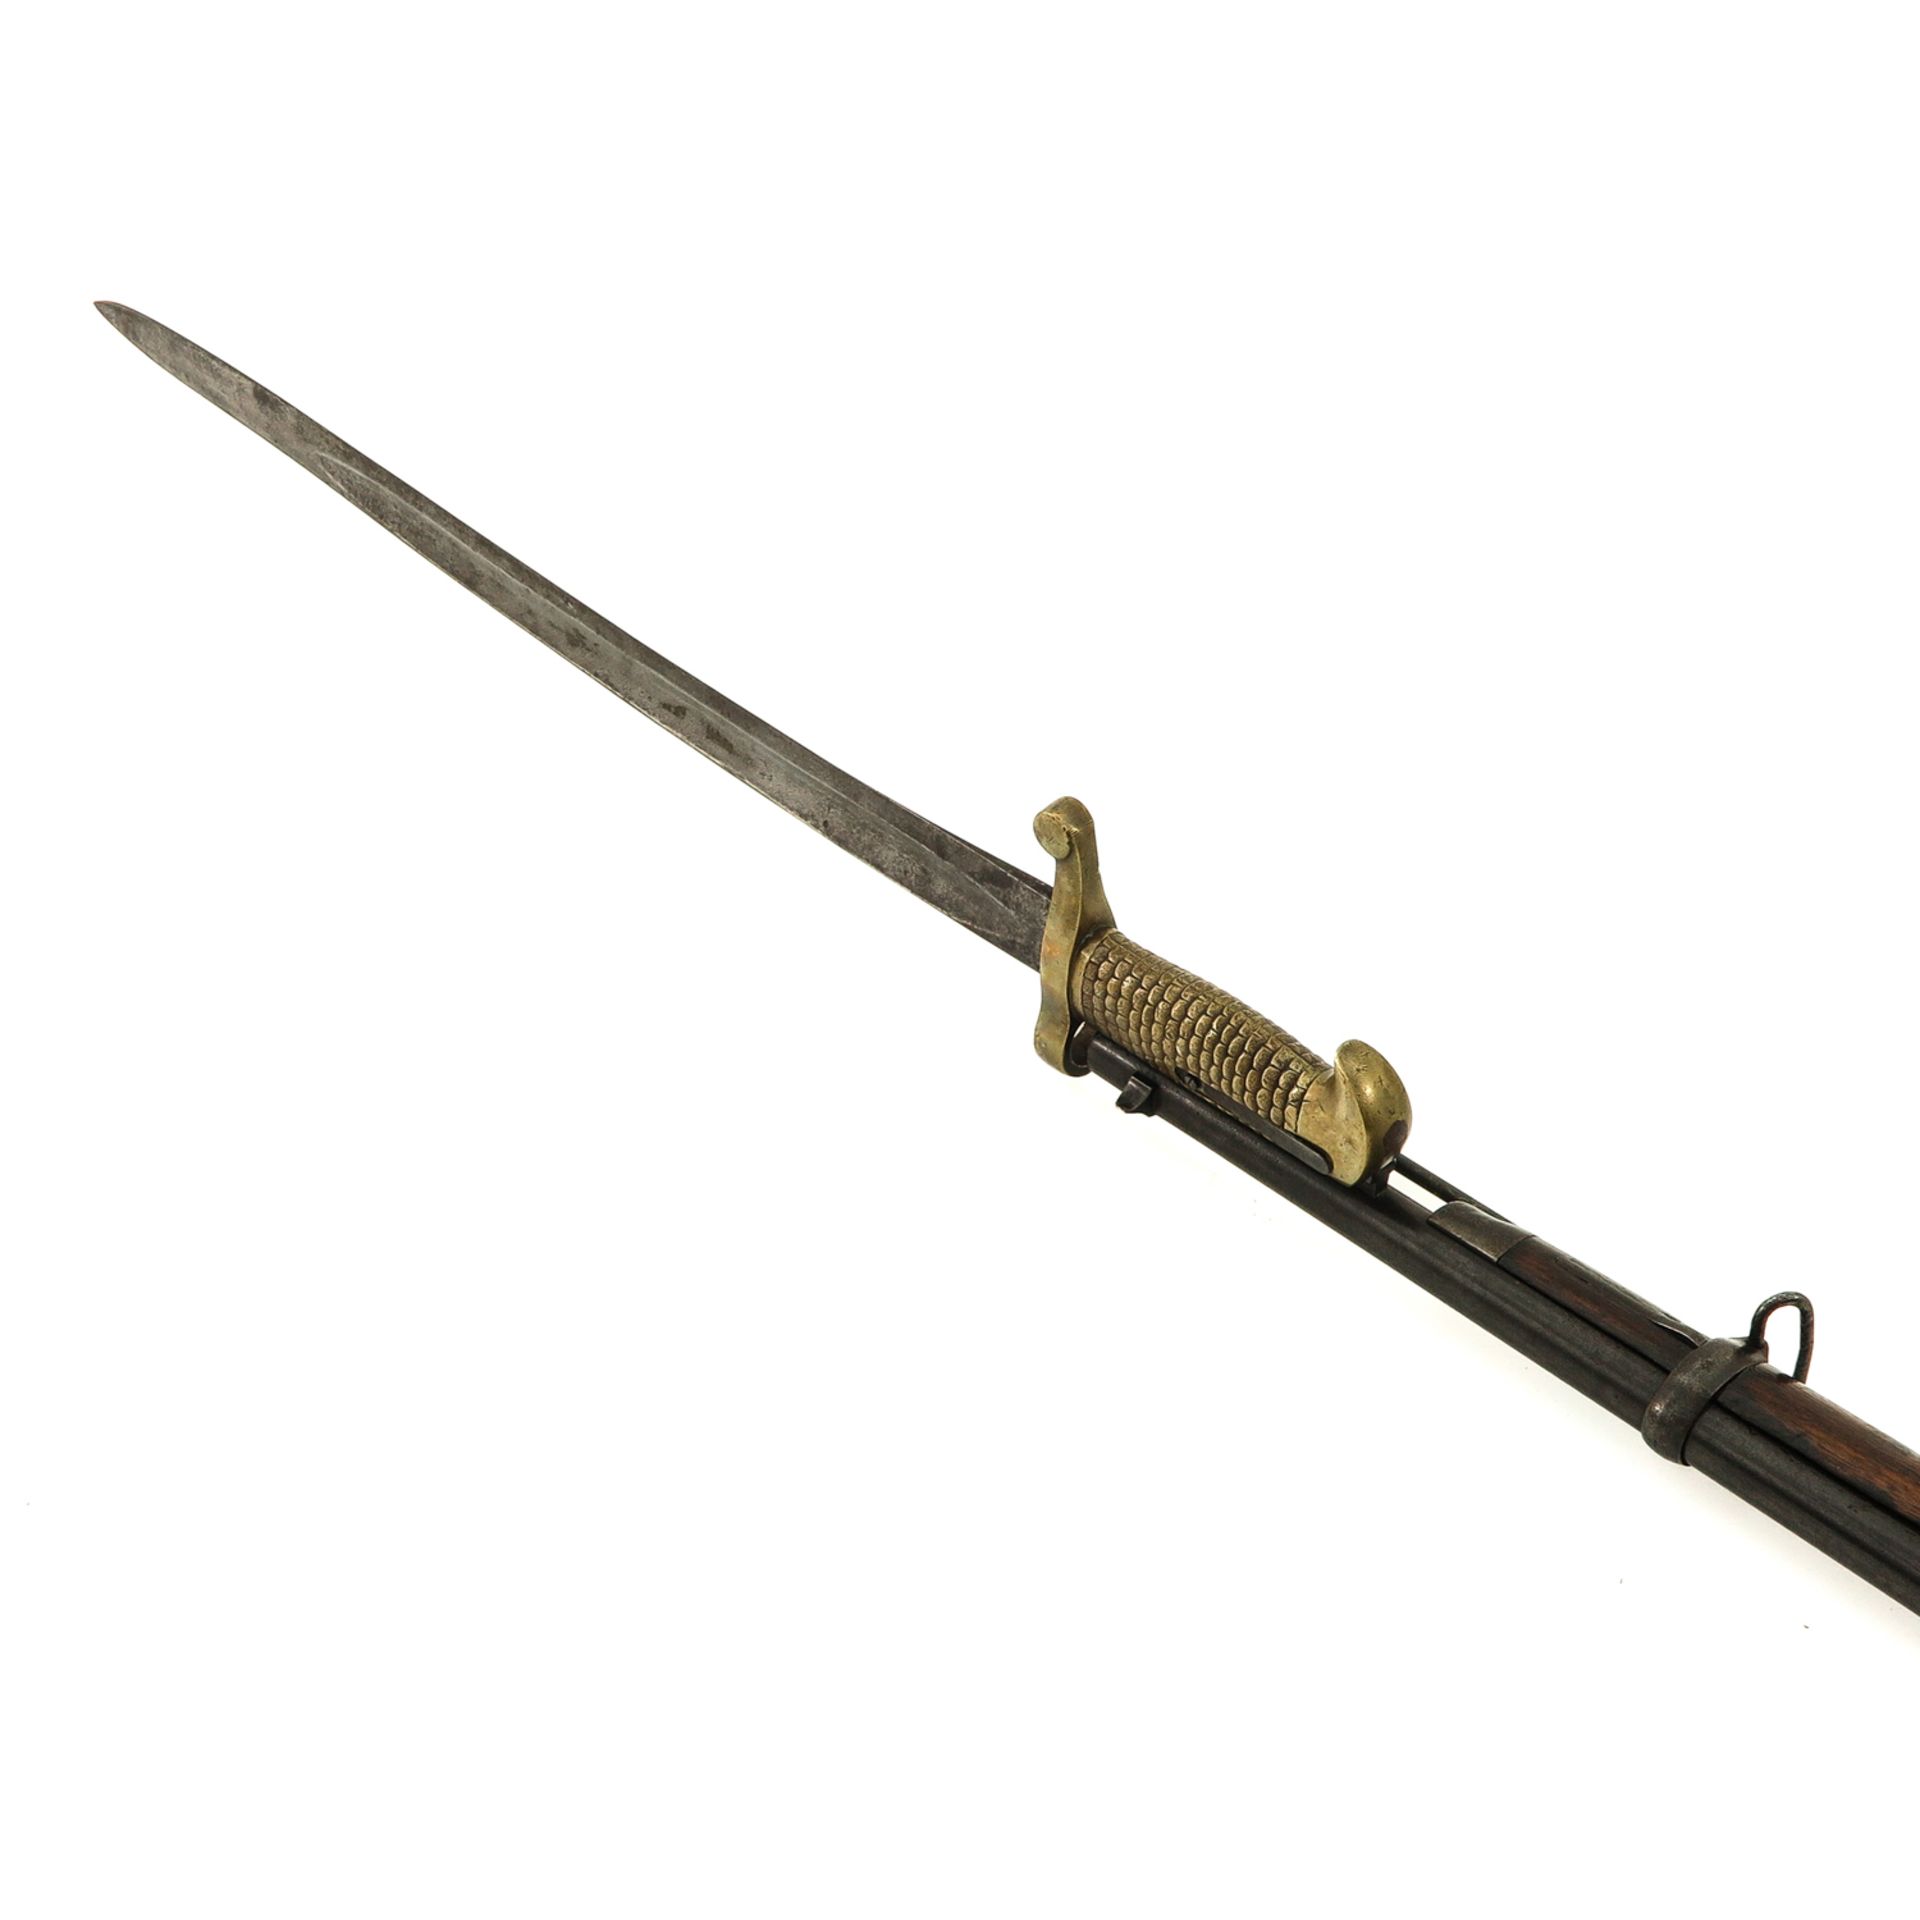 A Remington Carbine with Matching Bayonet - Image 9 of 10